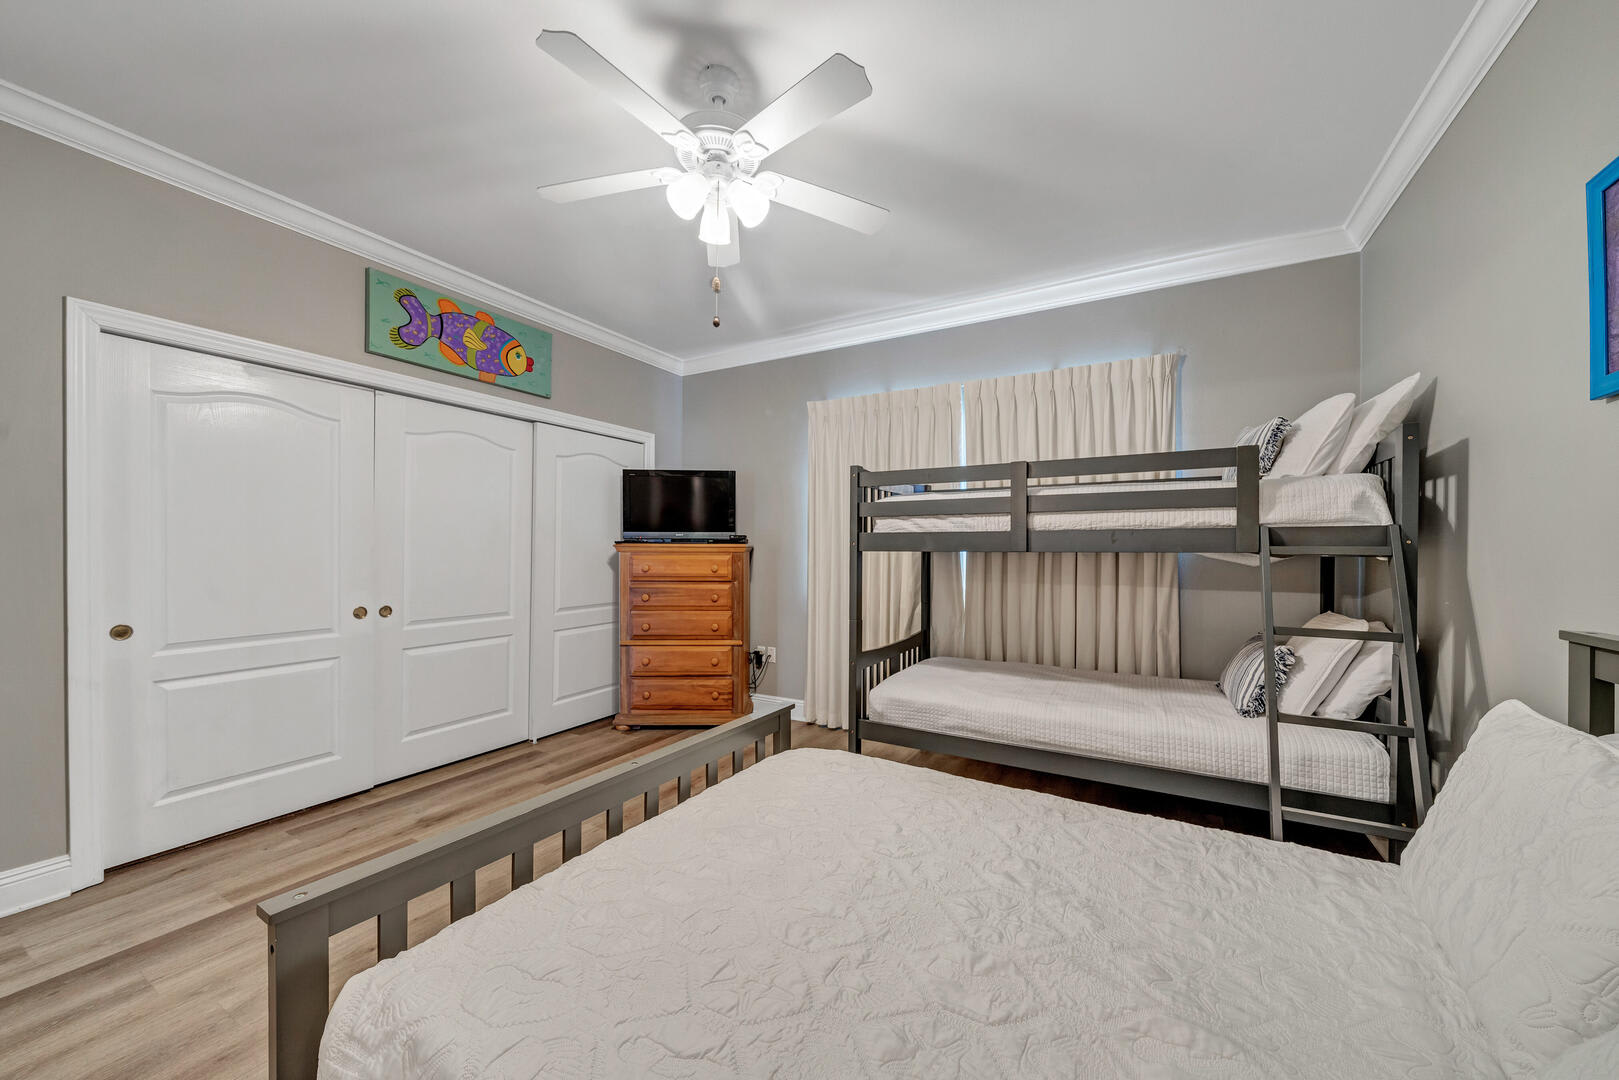 Family friendly room with full size bed and twin bunk bed